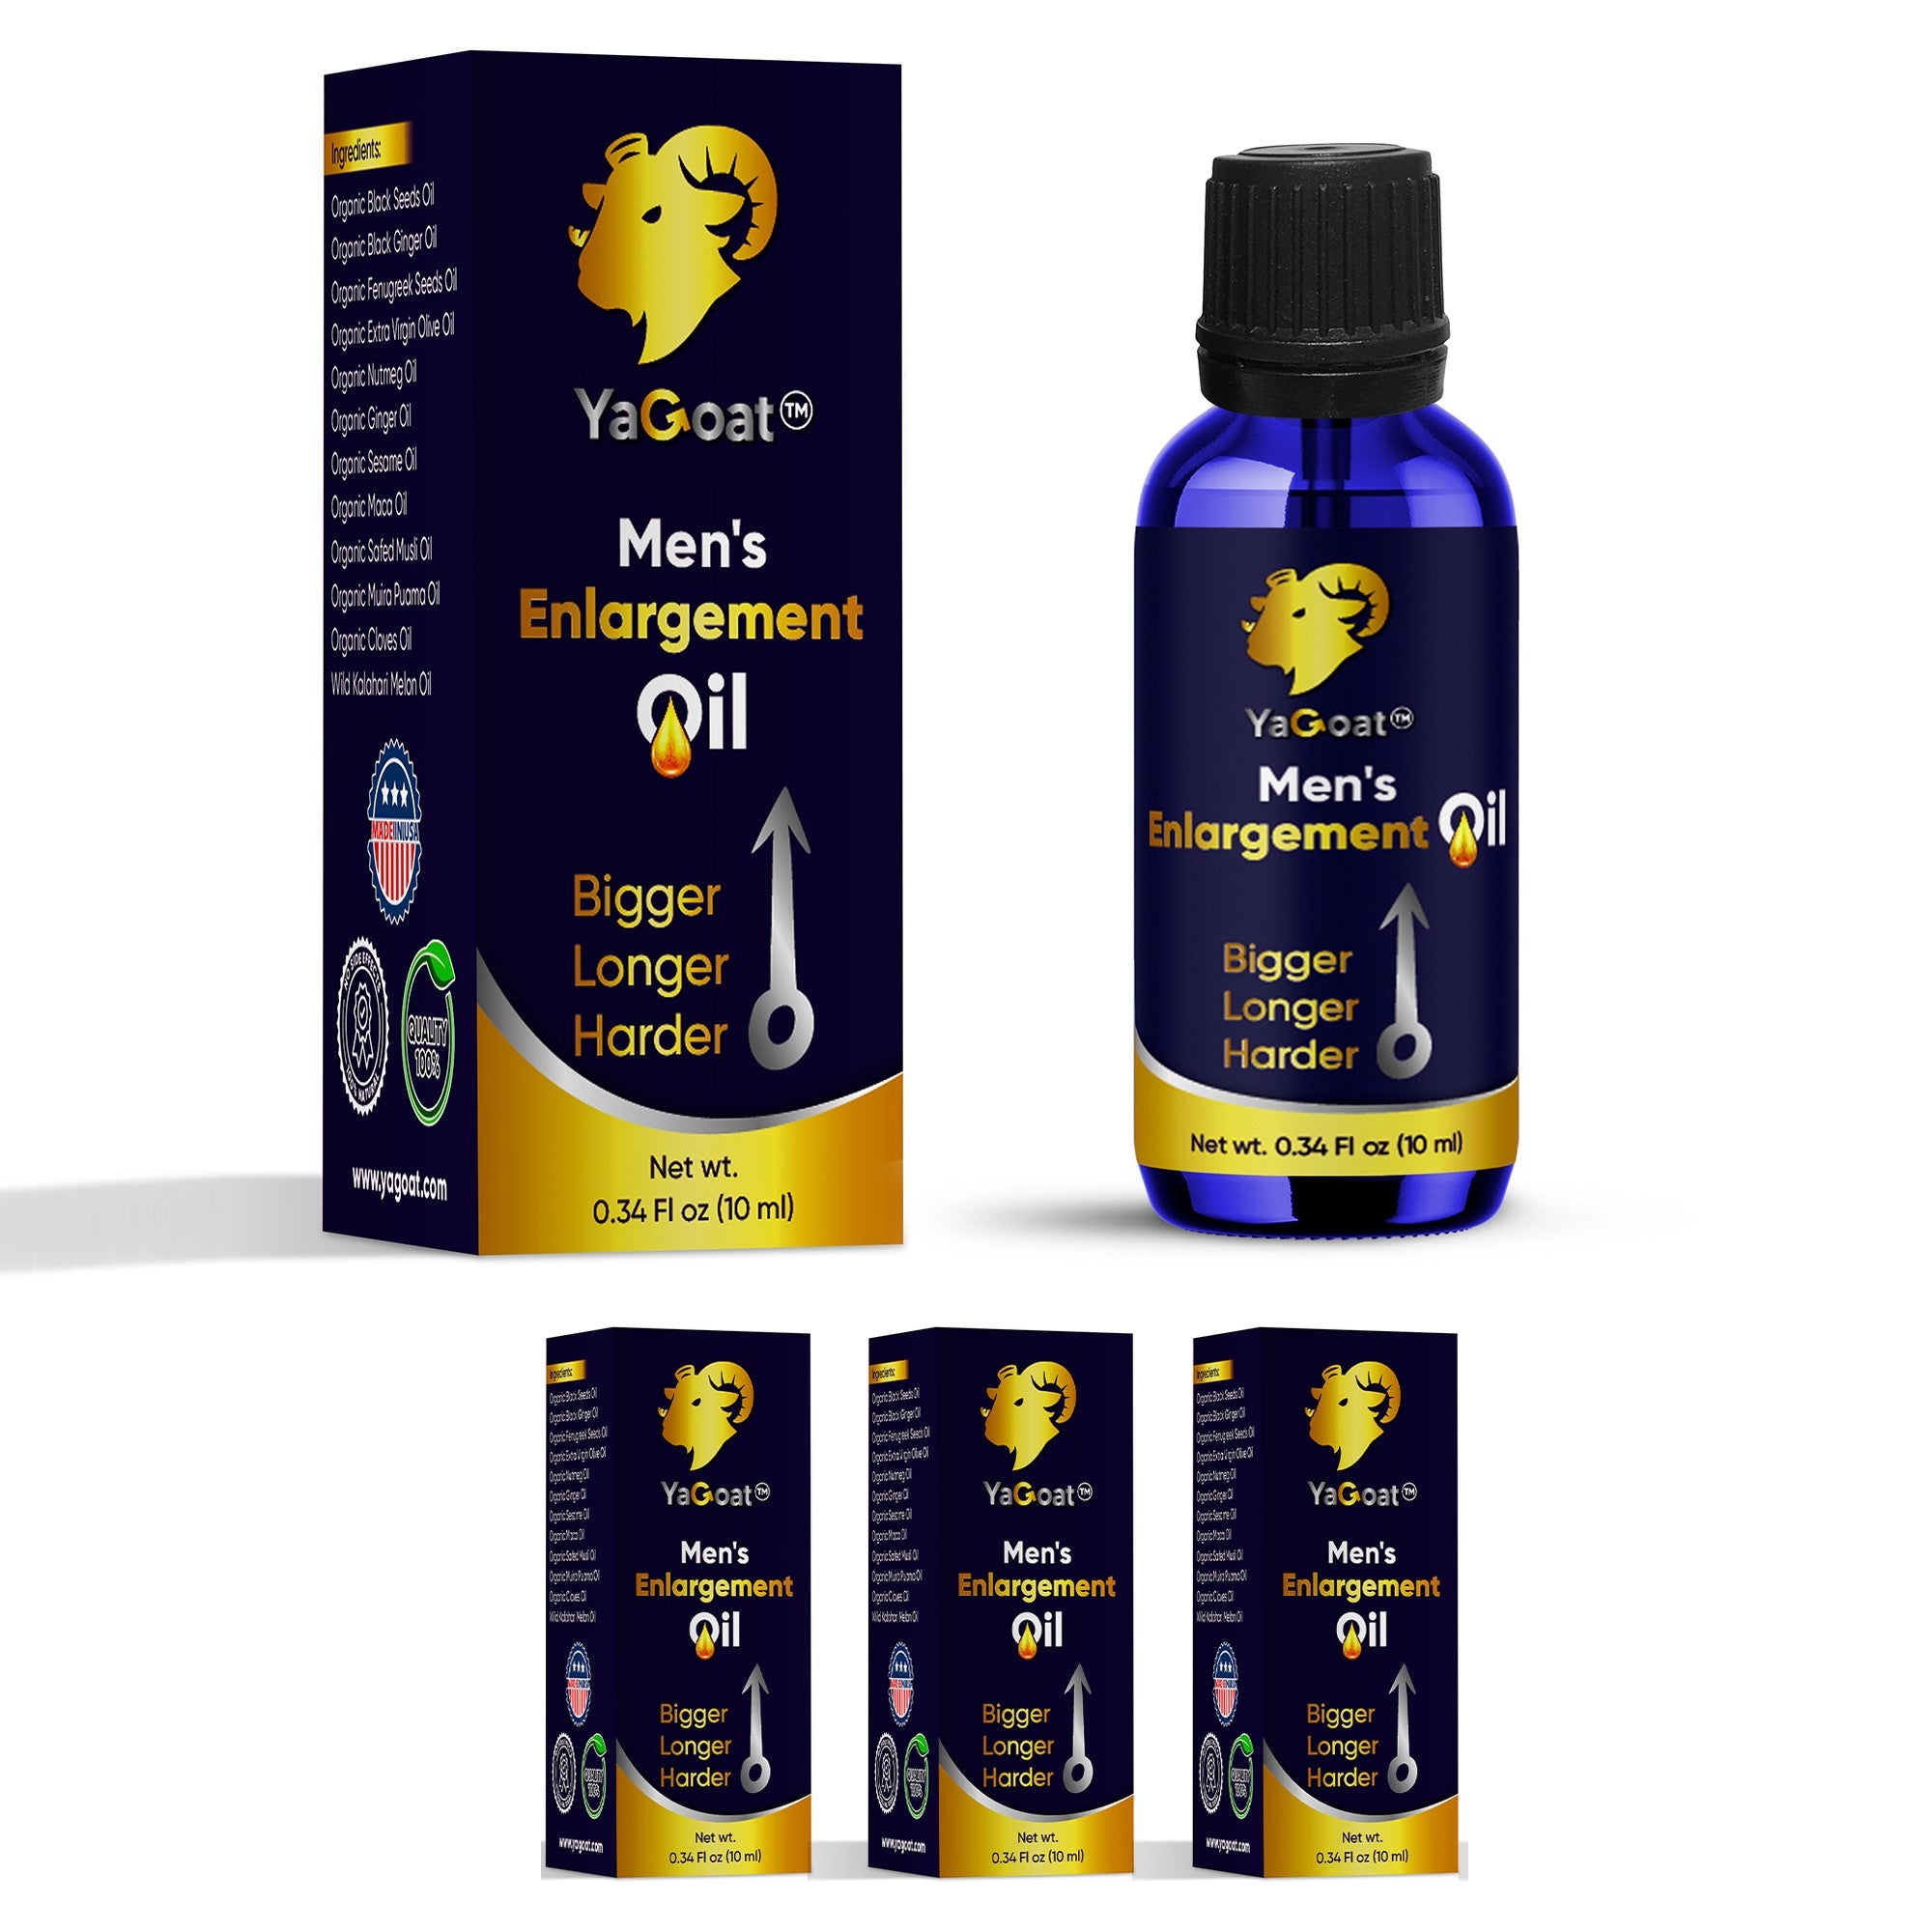 Enlargement oil how to get a big penis the real way to increase your men enlargement oil enhancement oil oil for enlargement real way to increase penis size growth oil